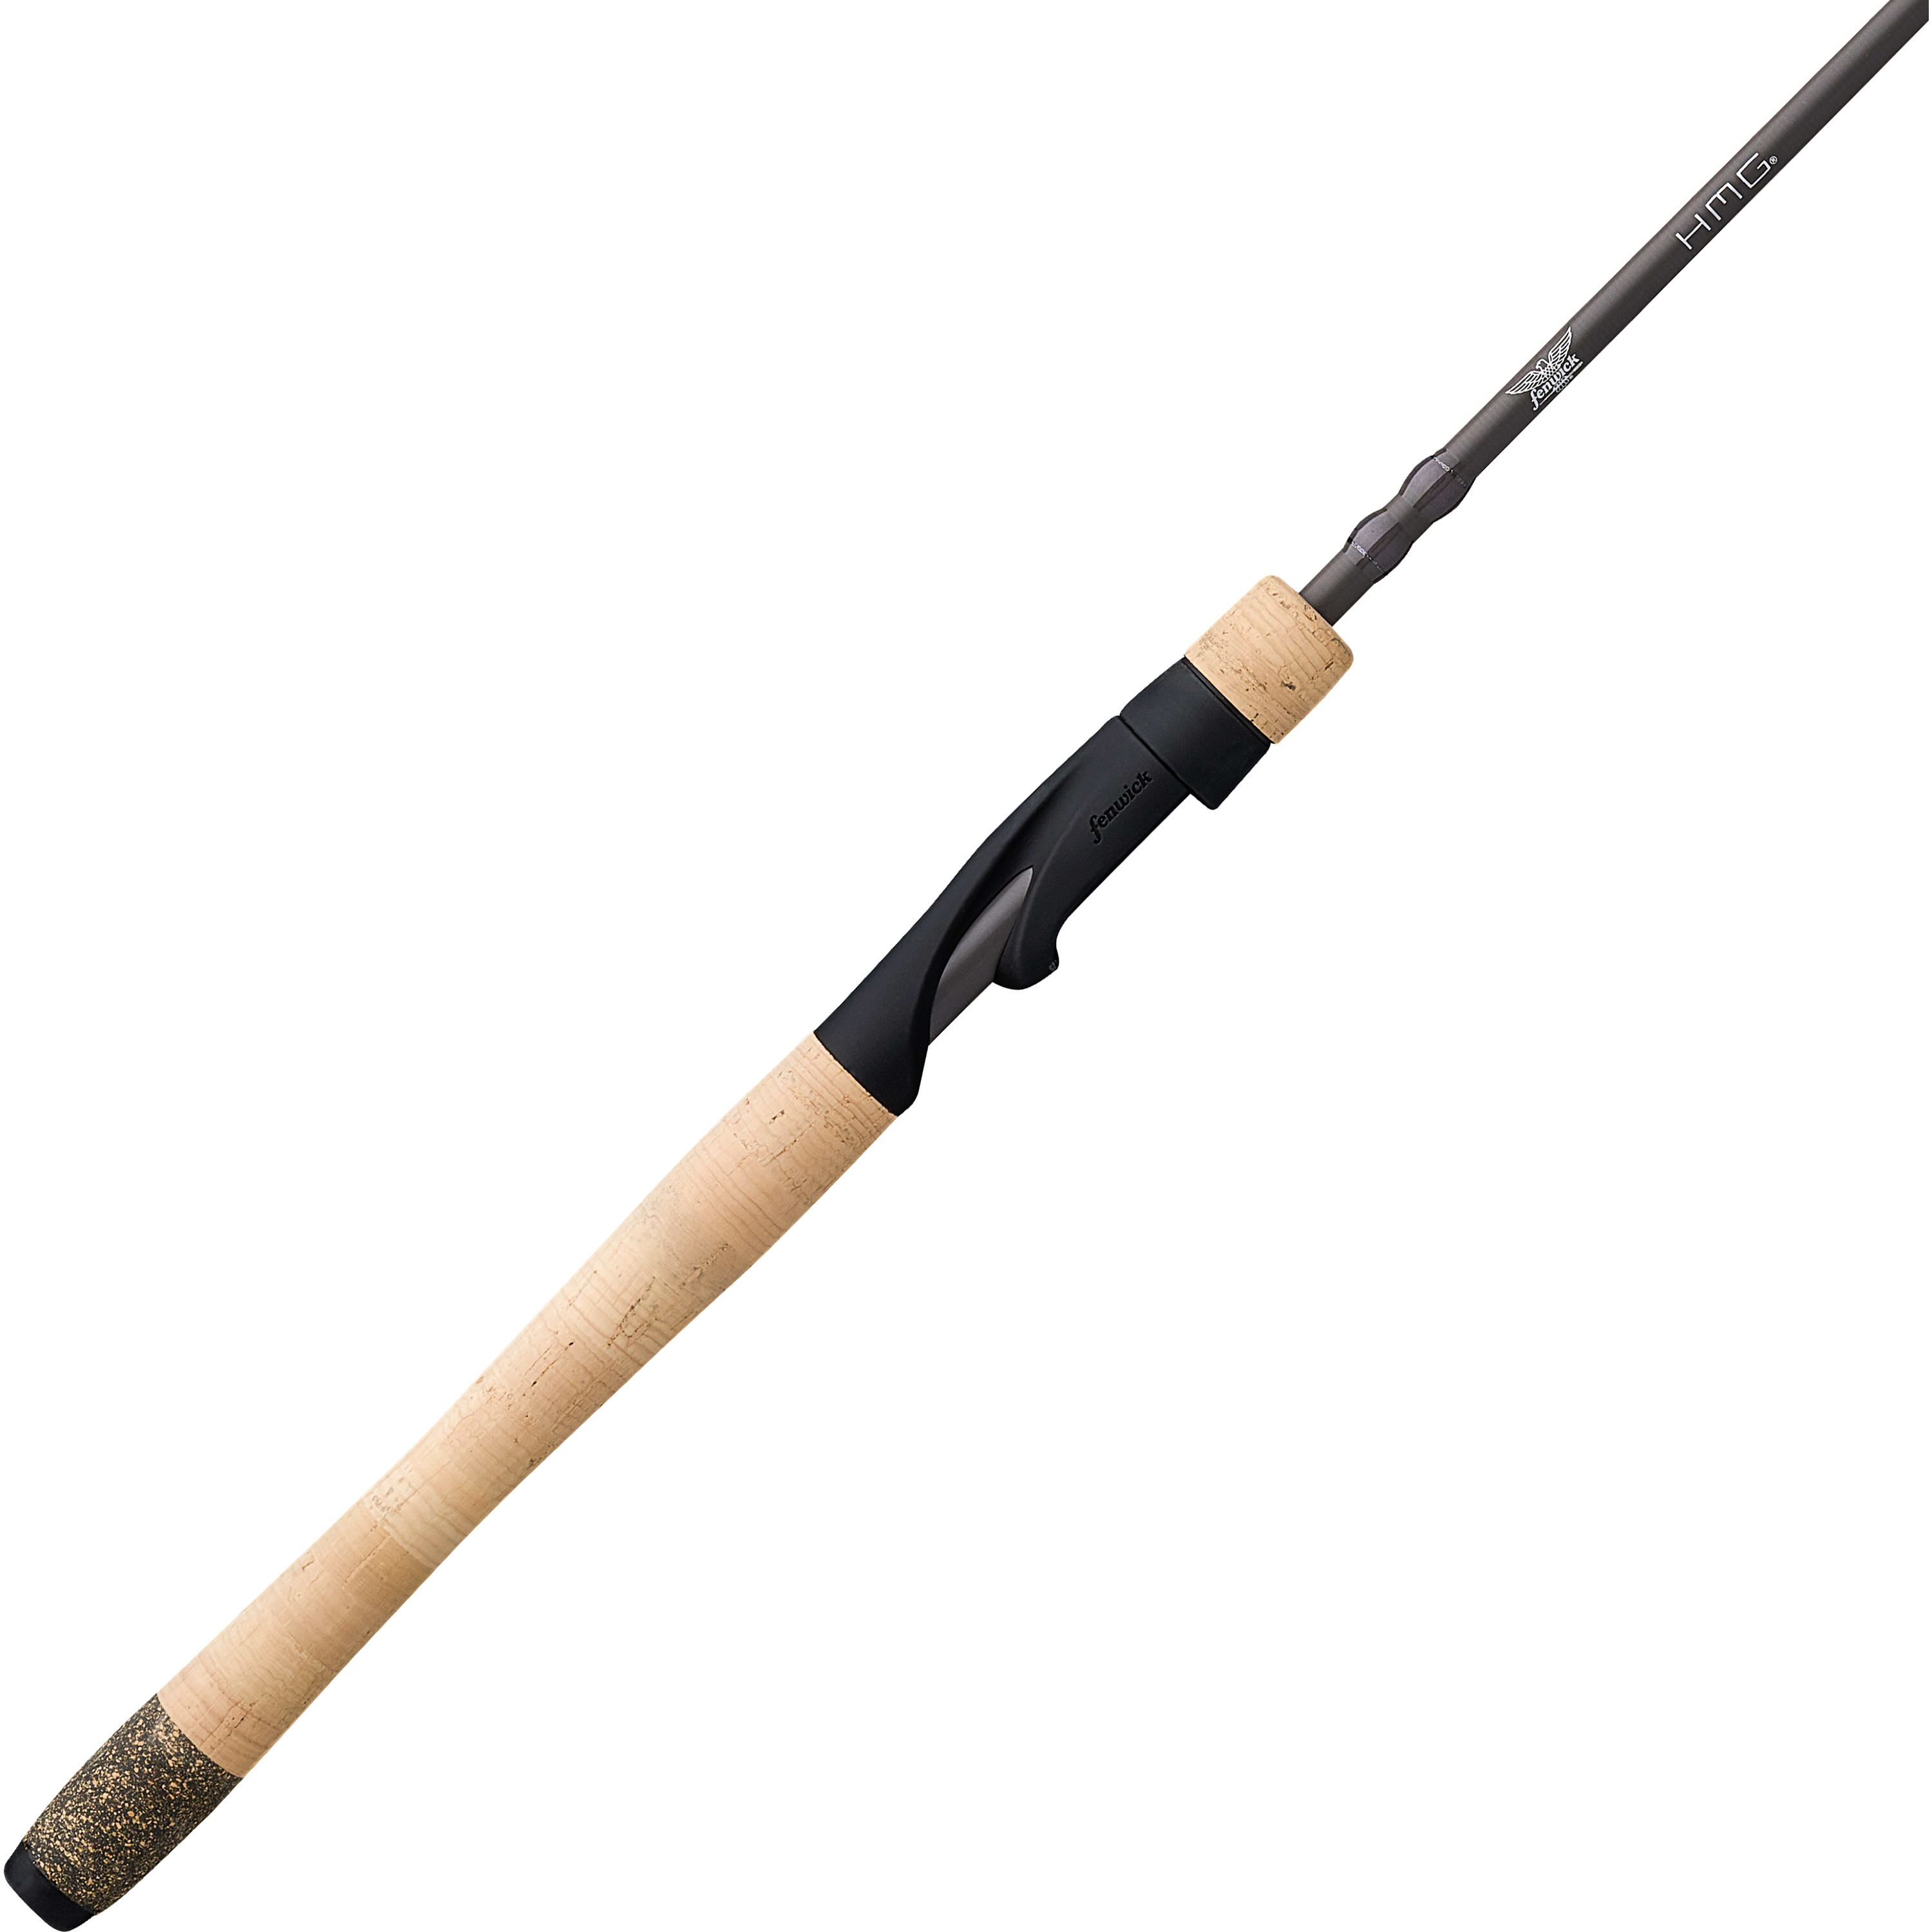 Buy CALANDIS Spinning Fishing Rod Handle Aluminum Alloy Fishing Rod  Replacement Blue Online In India At Discounted Prices